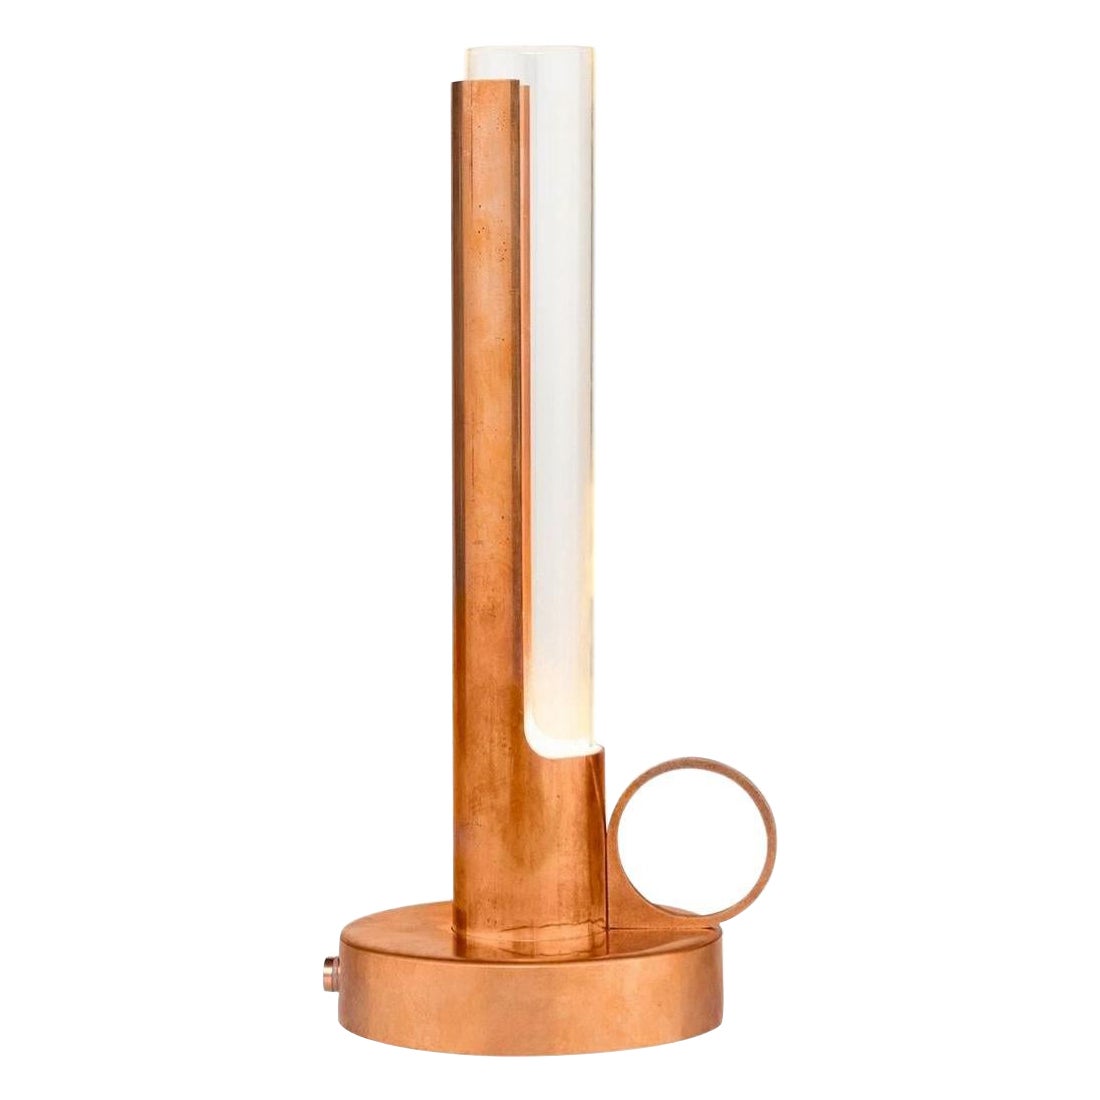 Pierre Sindre 'Visir' Portable Copper and Glass Table Lamp for Örsjö For Sale